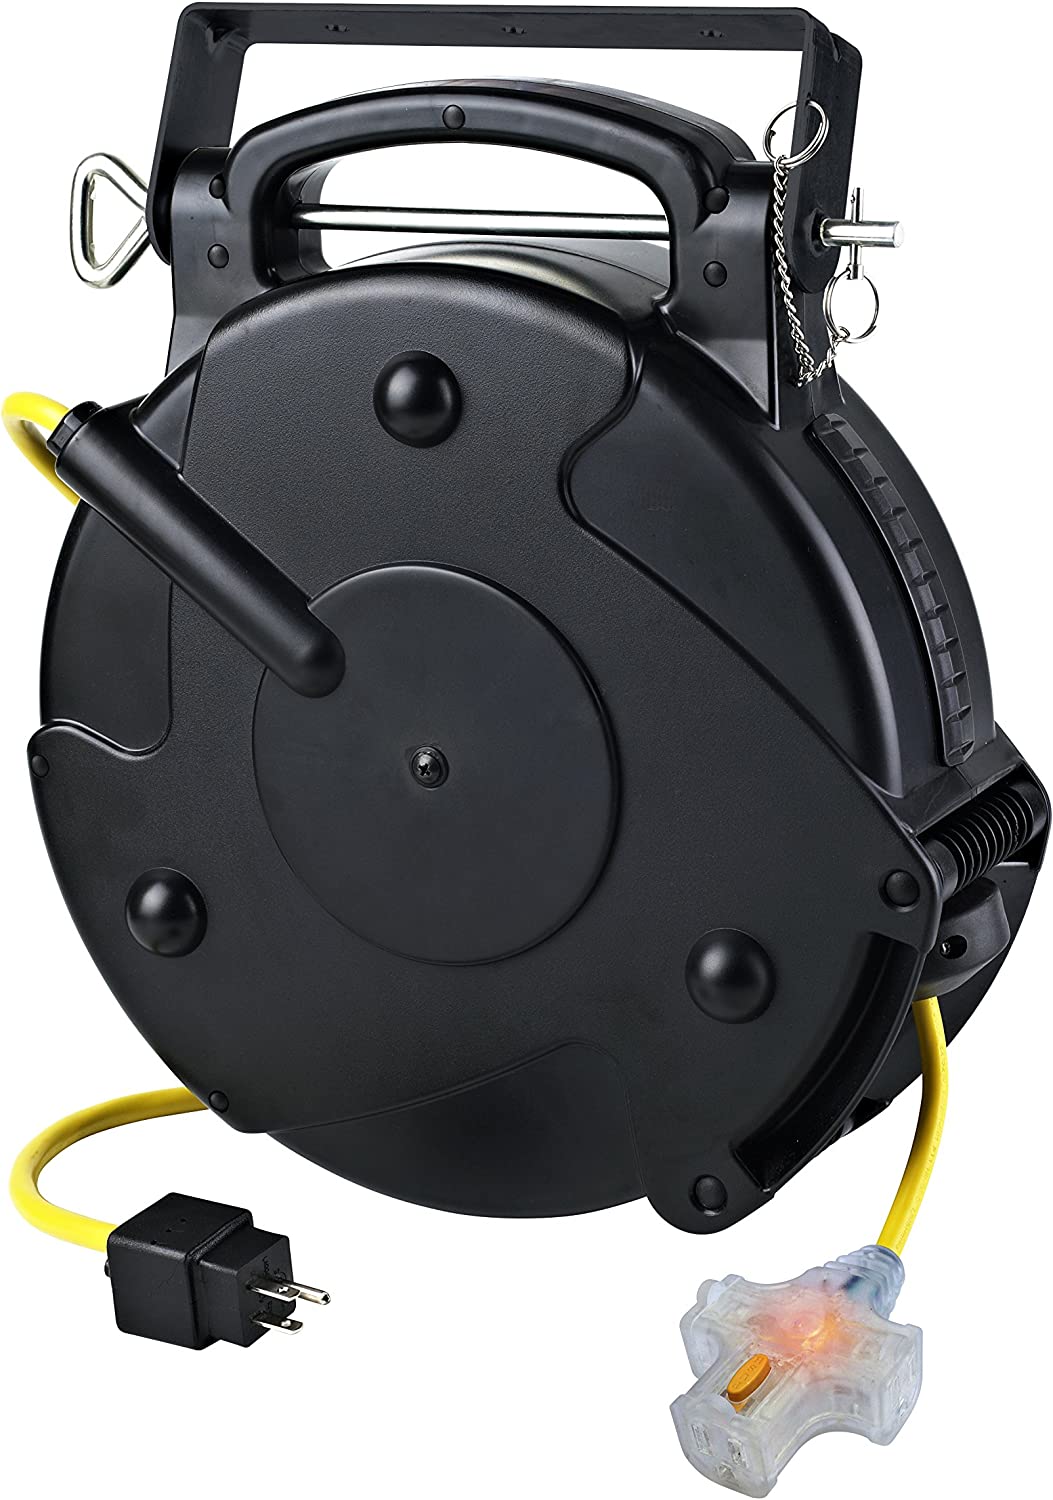 Retractable Extension Cord | Tri Tap Cord Reel with Locking Outlet, Black - E.S.N Tools